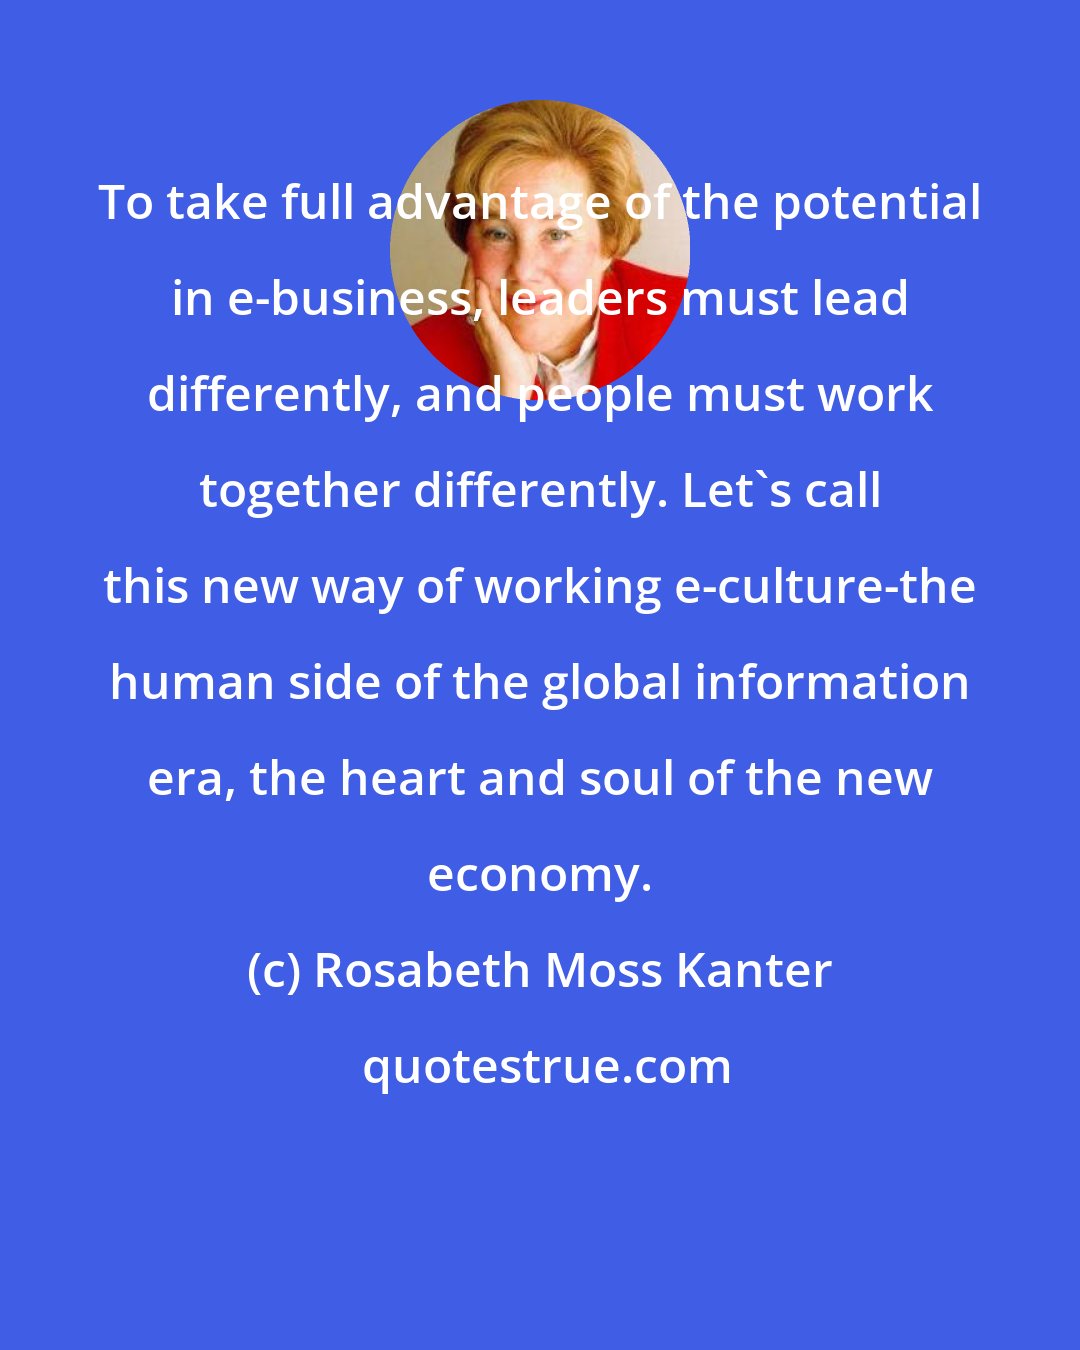 Rosabeth Moss Kanter: To take full advantage of the potential in e-business, leaders must lead differently, and people must work together differently. Let's call this new way of working e-culture-the human side of the global information era, the heart and soul of the new economy.